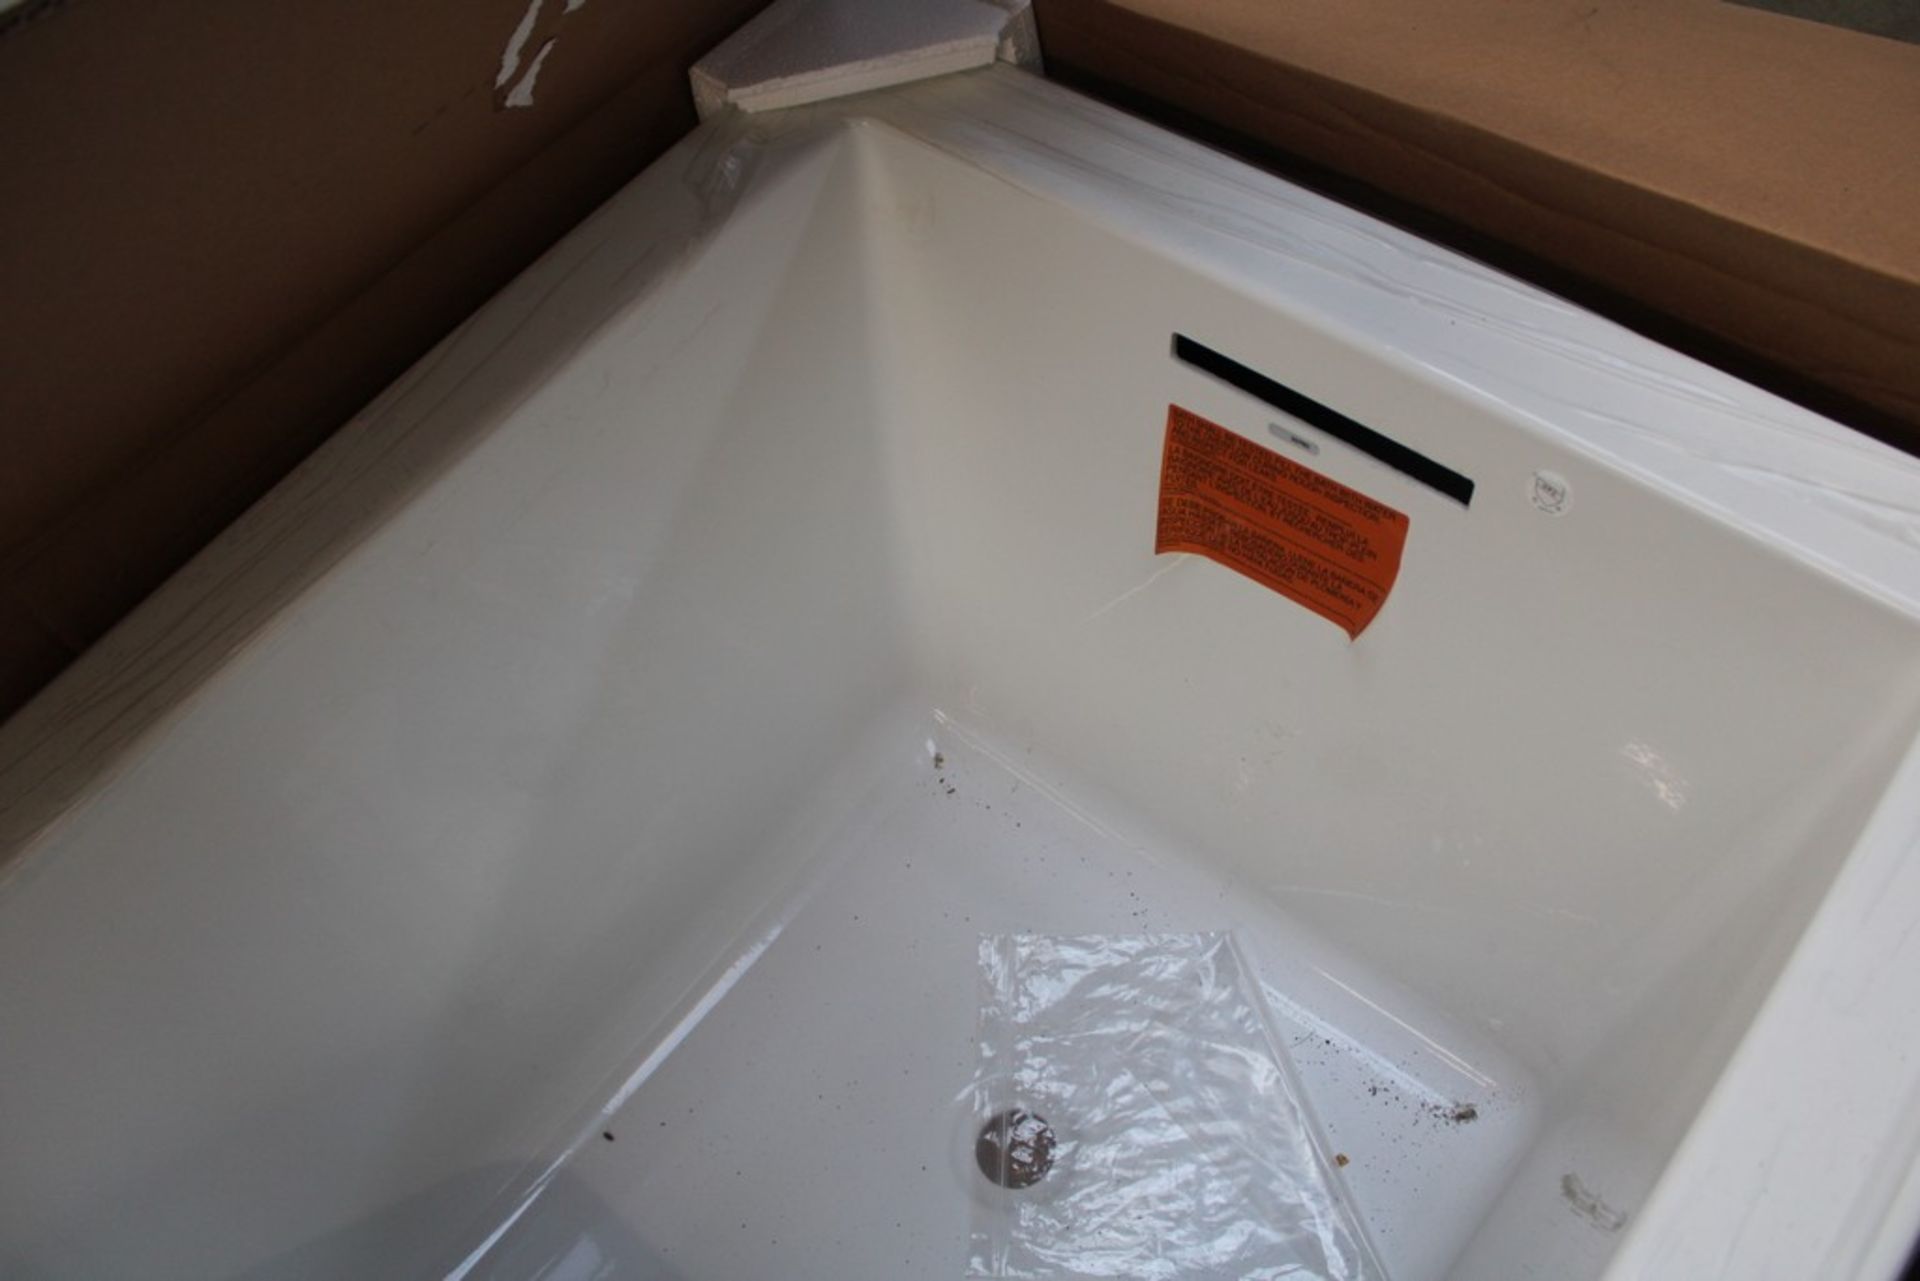 KOHLER MODEL 1821-W1-O DROP IN BATH TUB WITH HEATED SURFACE - Image 3 of 3